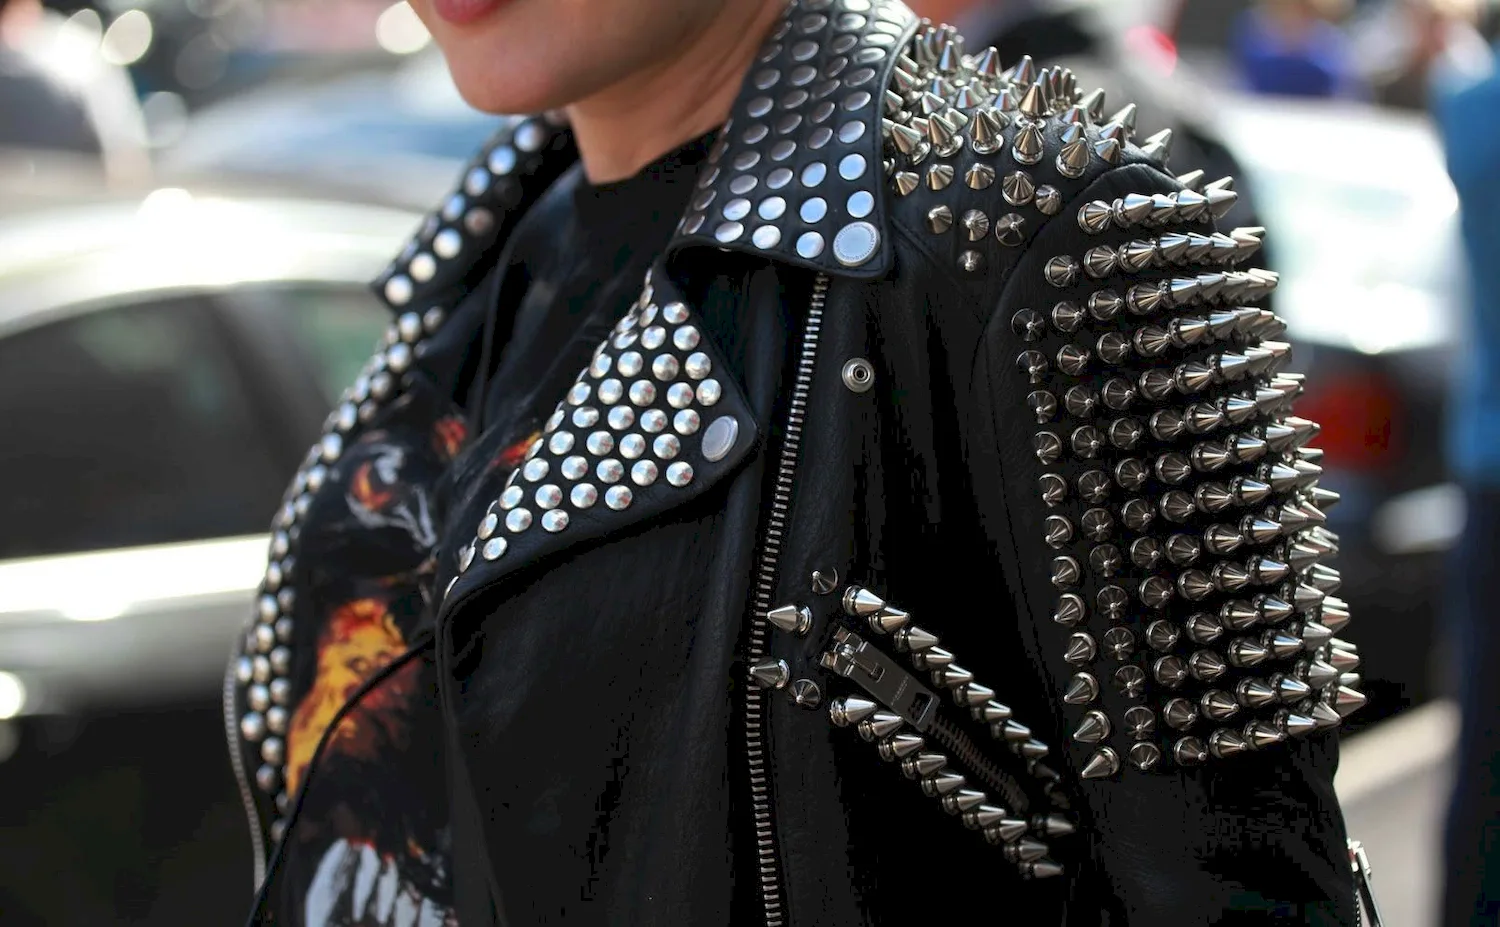 Burberry spiked Leather Jackets.